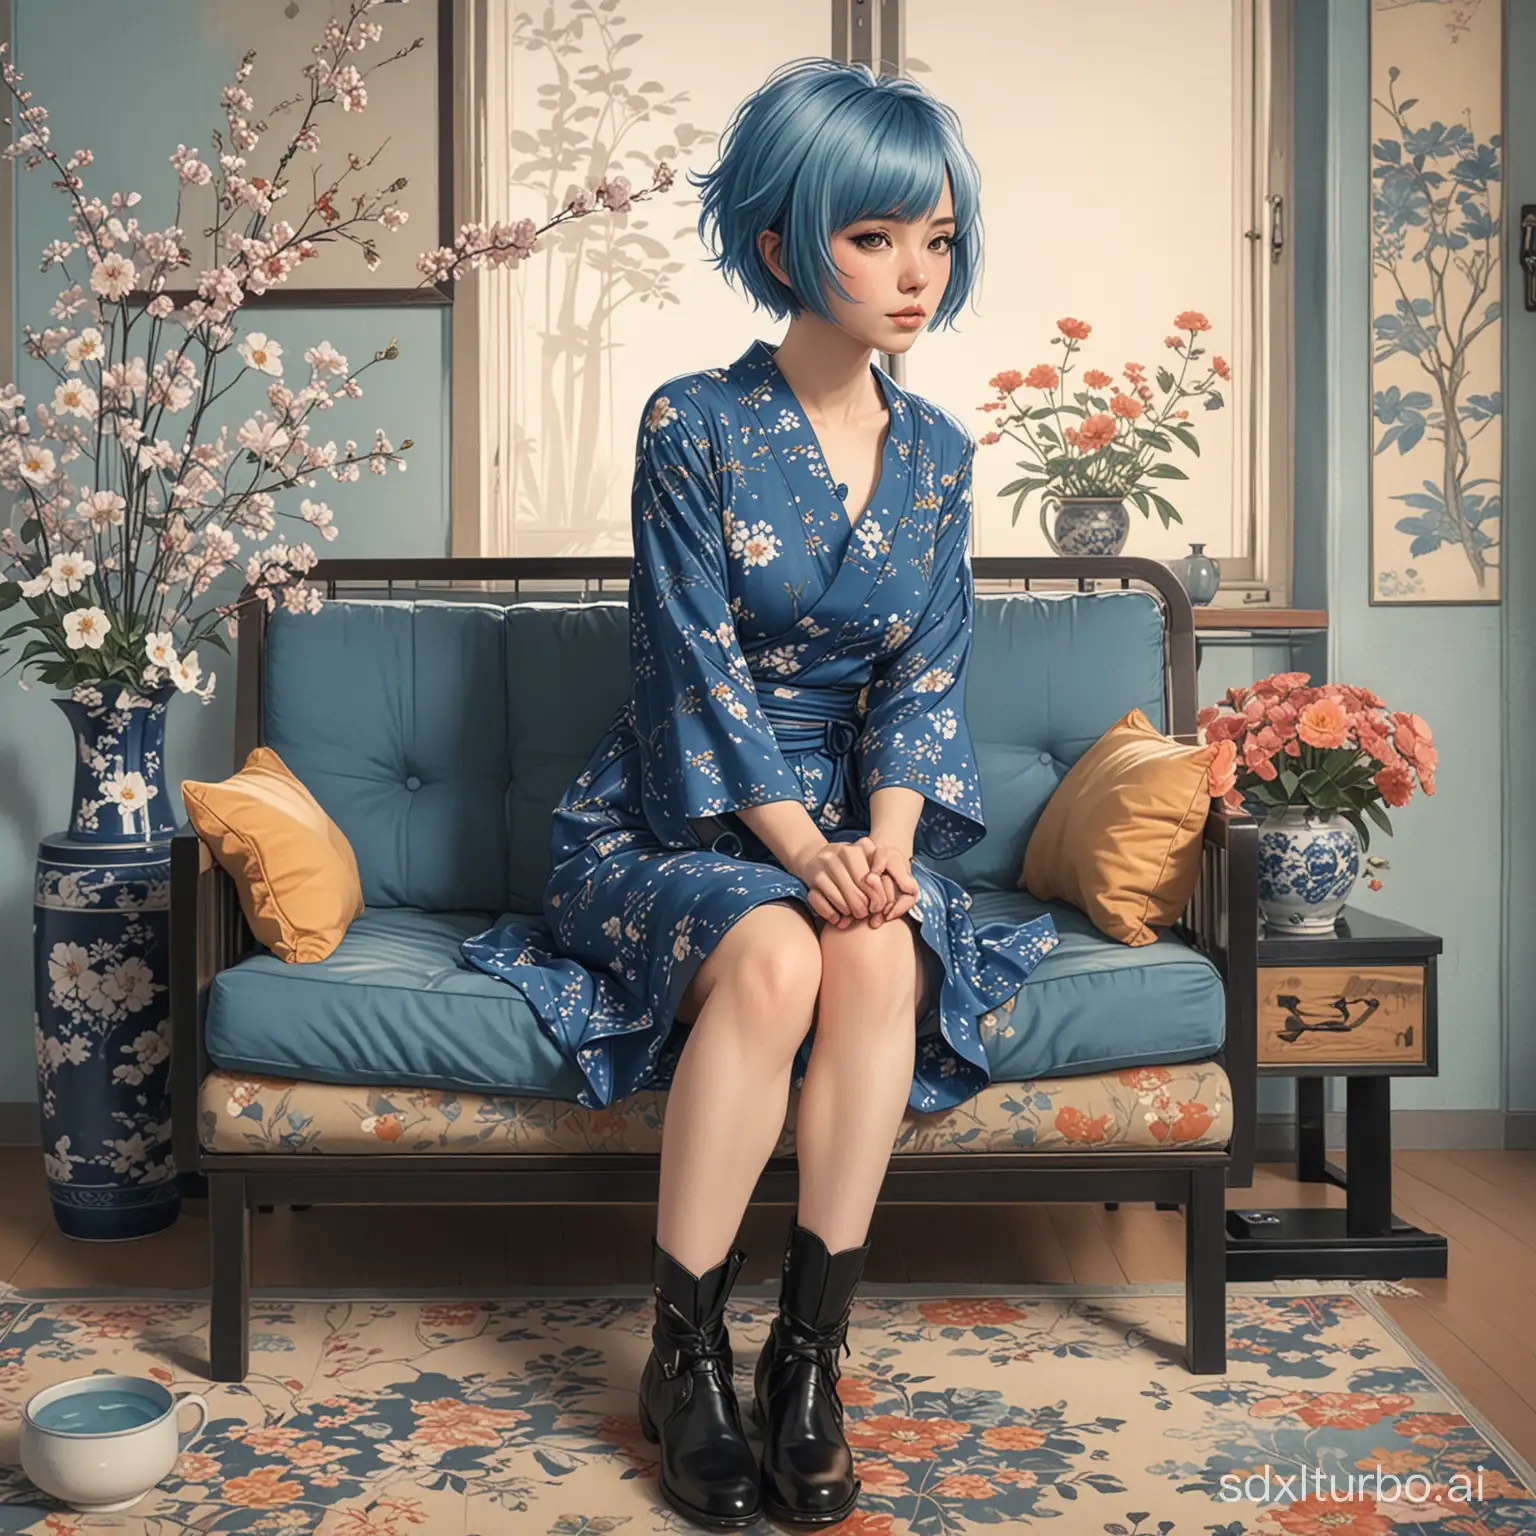 A 2d drawing of a woman  with a short blue bobhair in a Japanese livingroom,sat on a sofa holding a cup of coffee while adorned in a blue dress and black boots, the room has a low table and vase of flowers, in the style of anime